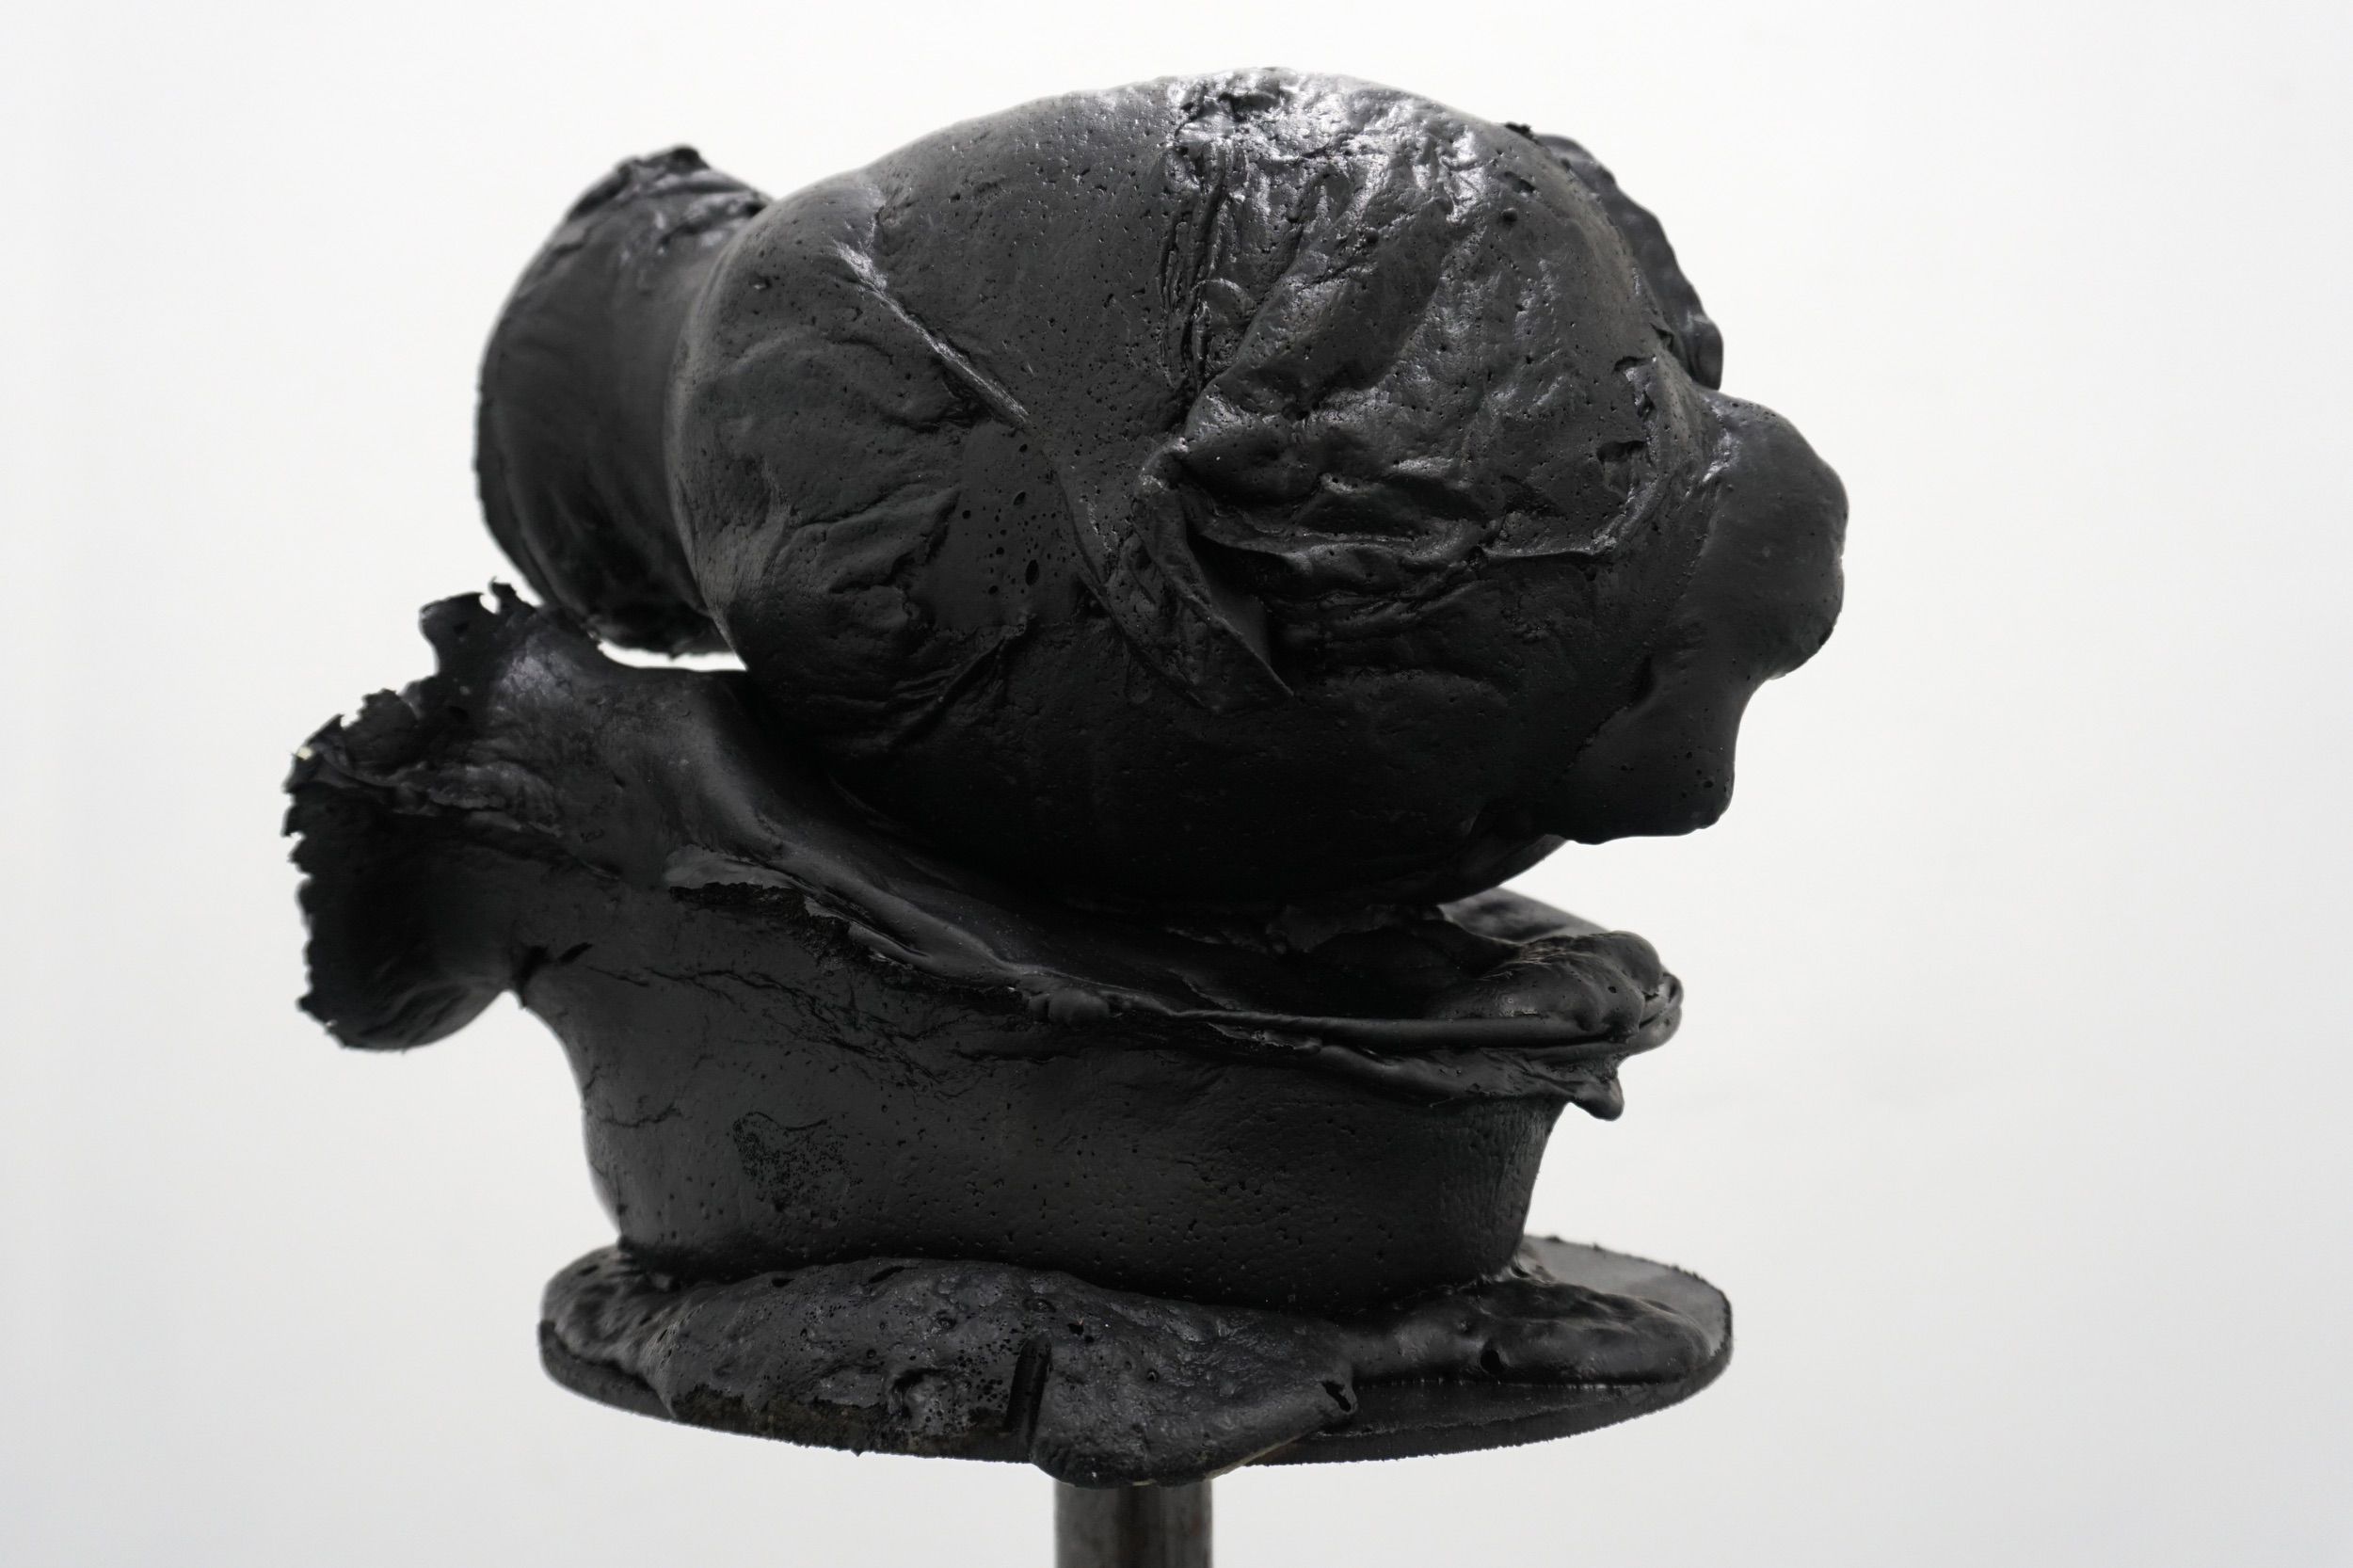  Brandon Ndife  Two Blacks , 2018 (detail) Cast foam and rubber 40 x 12 x 8 inches 